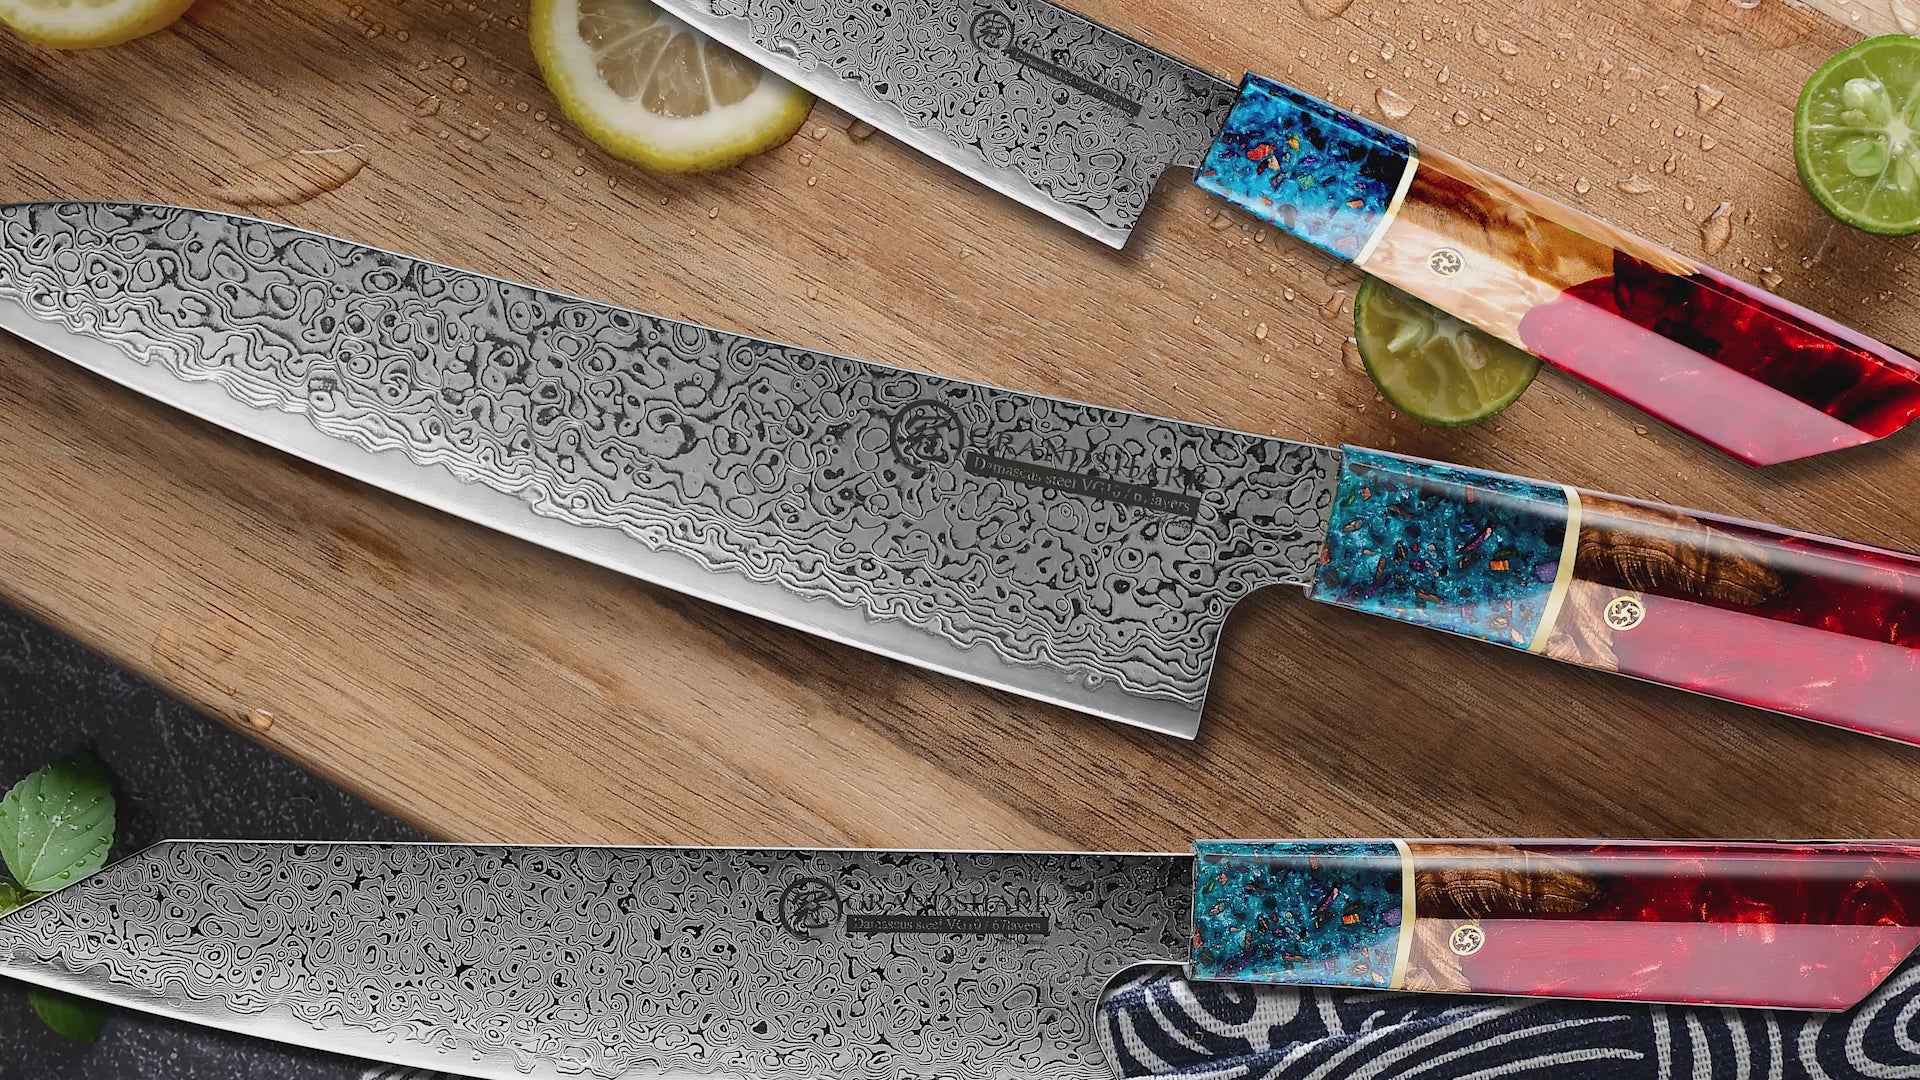  TUO Damascus Kitchen Knife Set, 8 Chef Knife and 3.5 Peeling  Paring Knife, Japanese AUS-10 High Carbon Steel, Full Tang Military Grade  G10 Handle, Dishwasher Safe Ring-D Series, 2-Piece: Home 